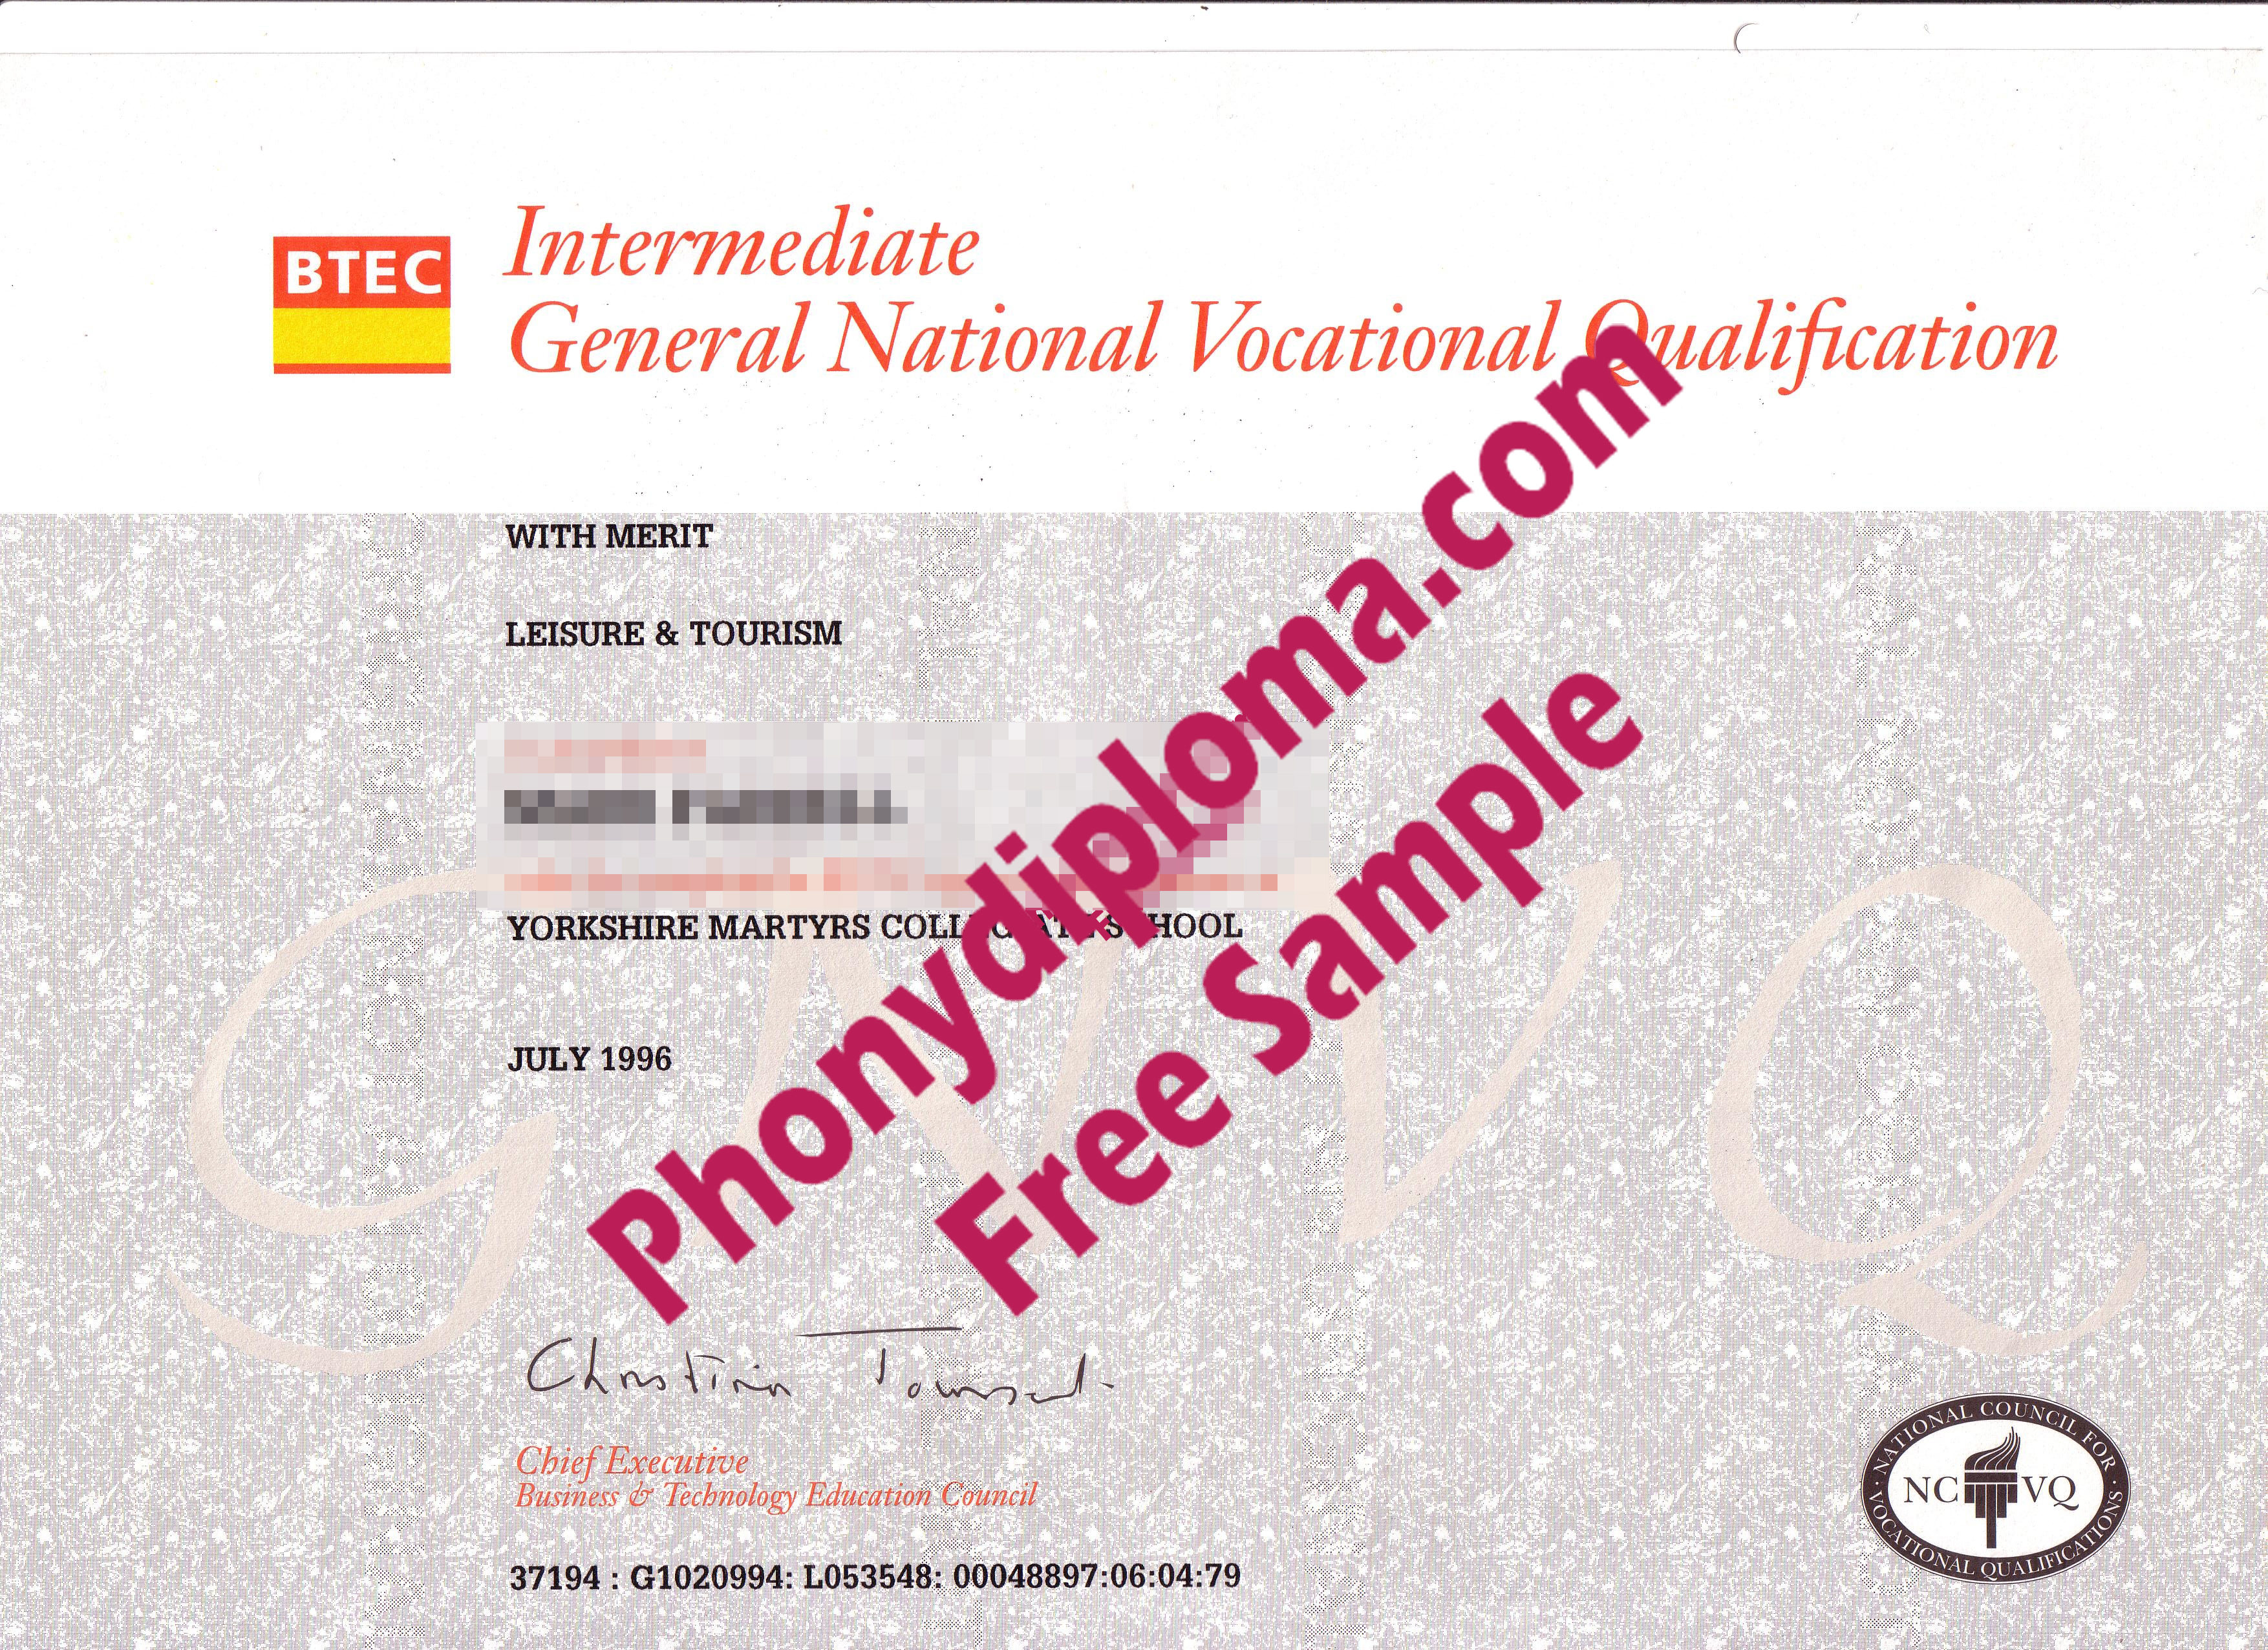 Btec Intermediate General National Vocational Qualifications Free Sample From Phonydiploma